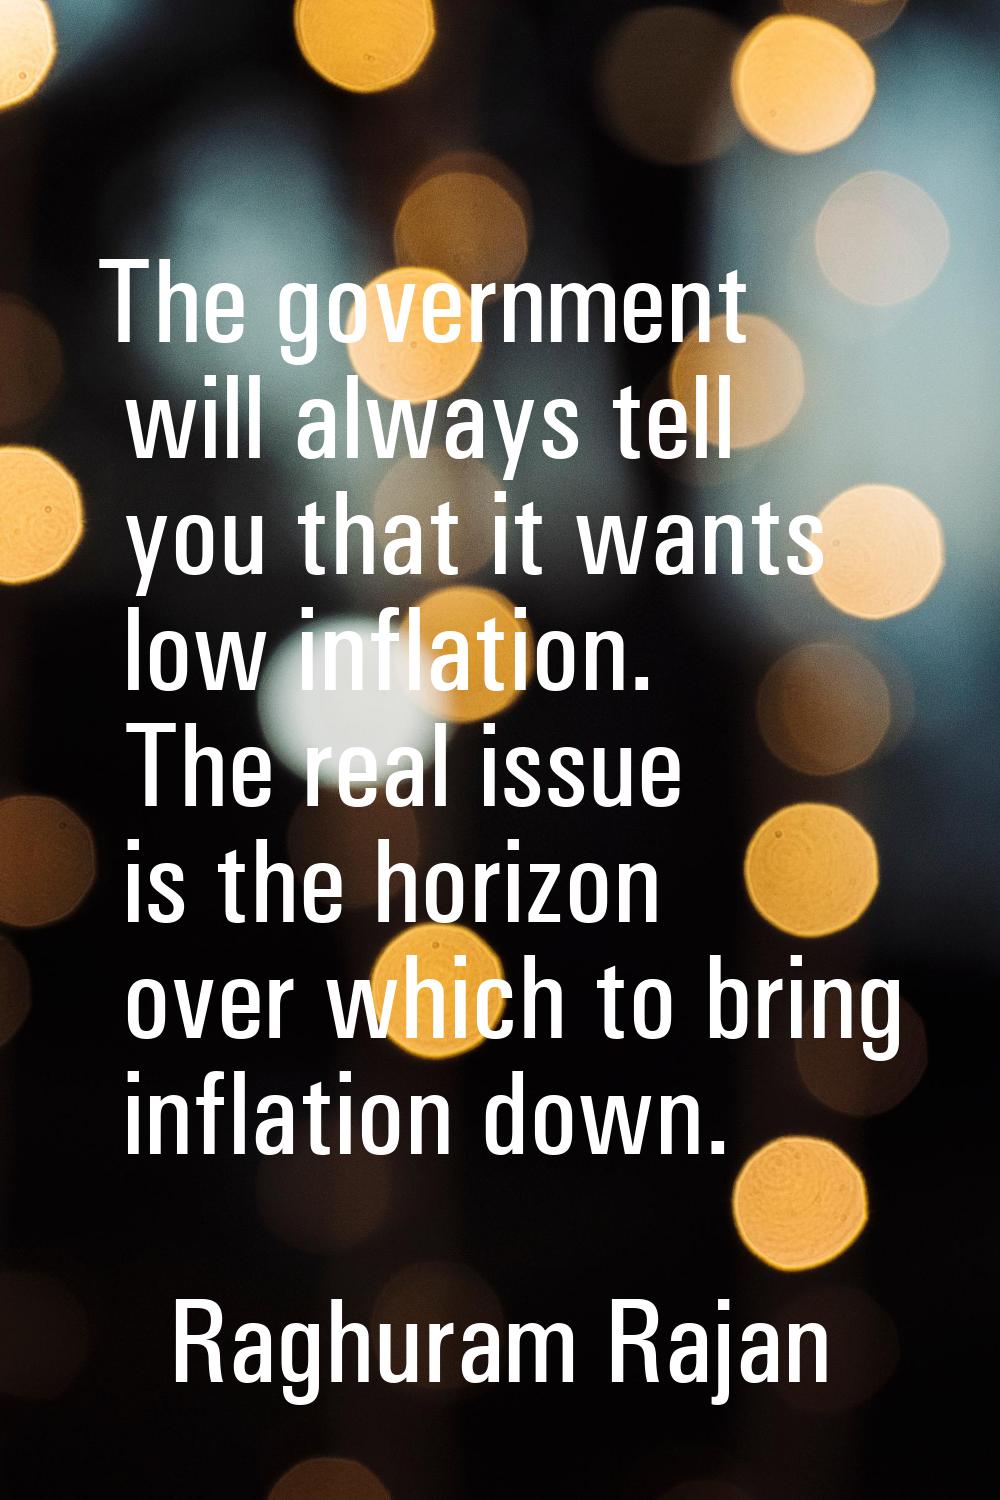 The government will always tell you that it wants low inflation. The real issue is the horizon over